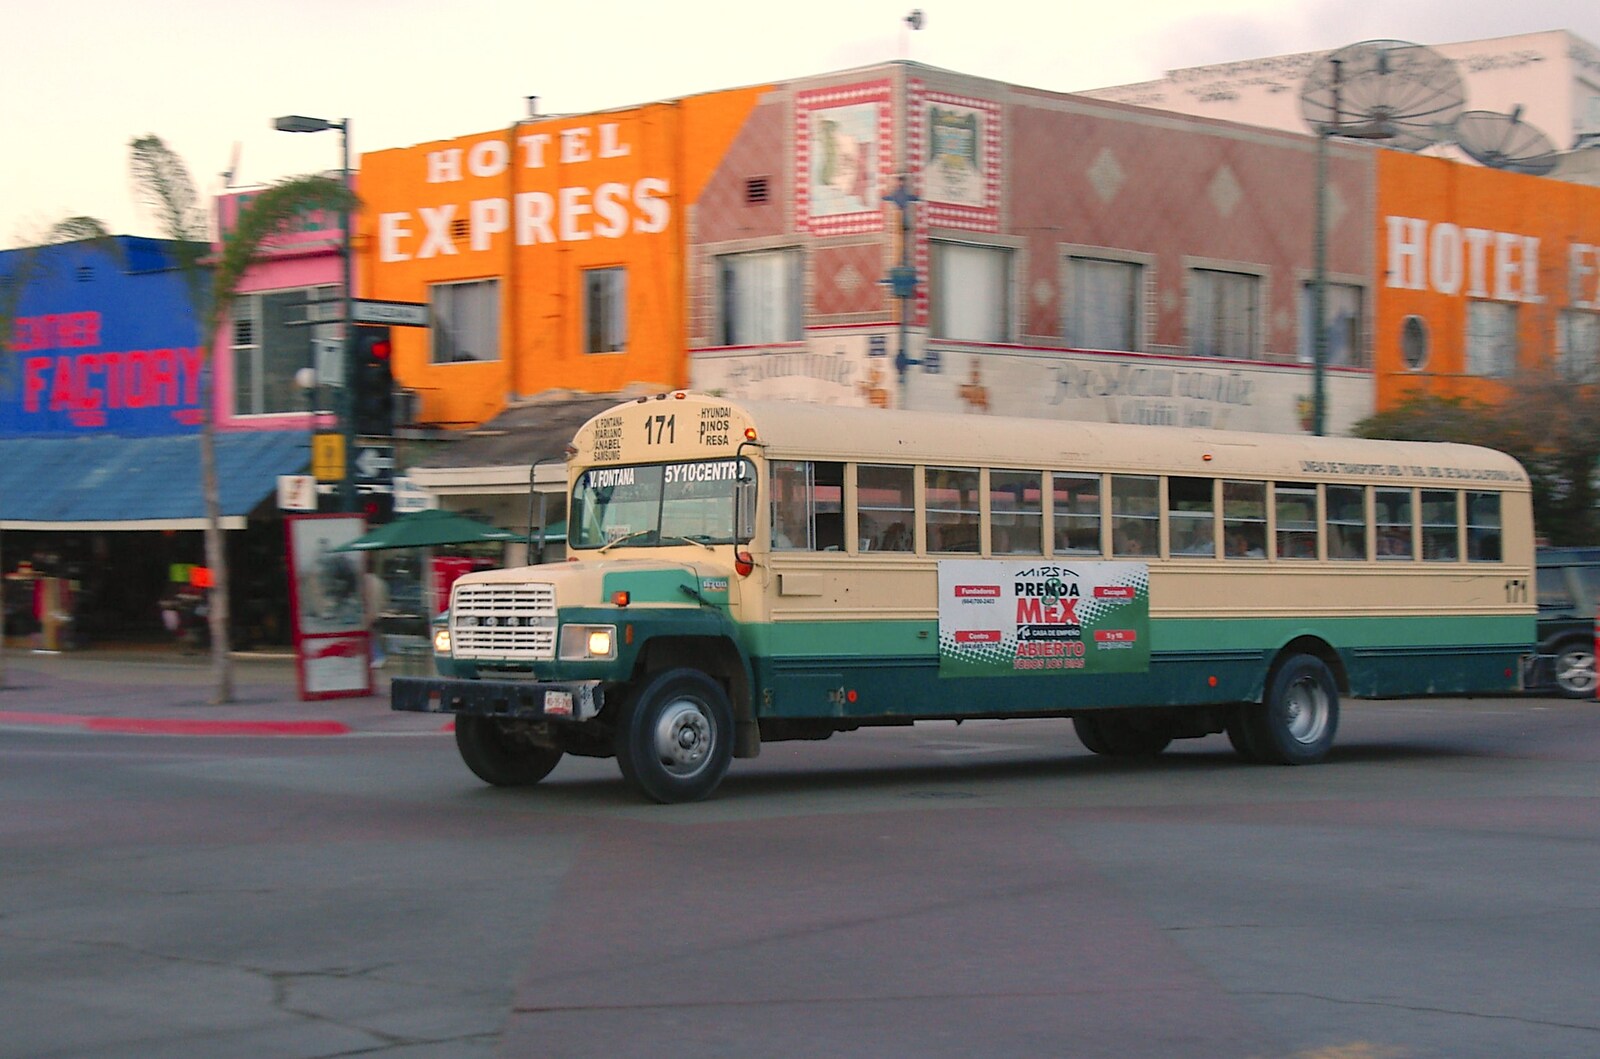 An adapted US schoolbus trundles around from A Trip to Tijuana, Mexico - 25th March 2006